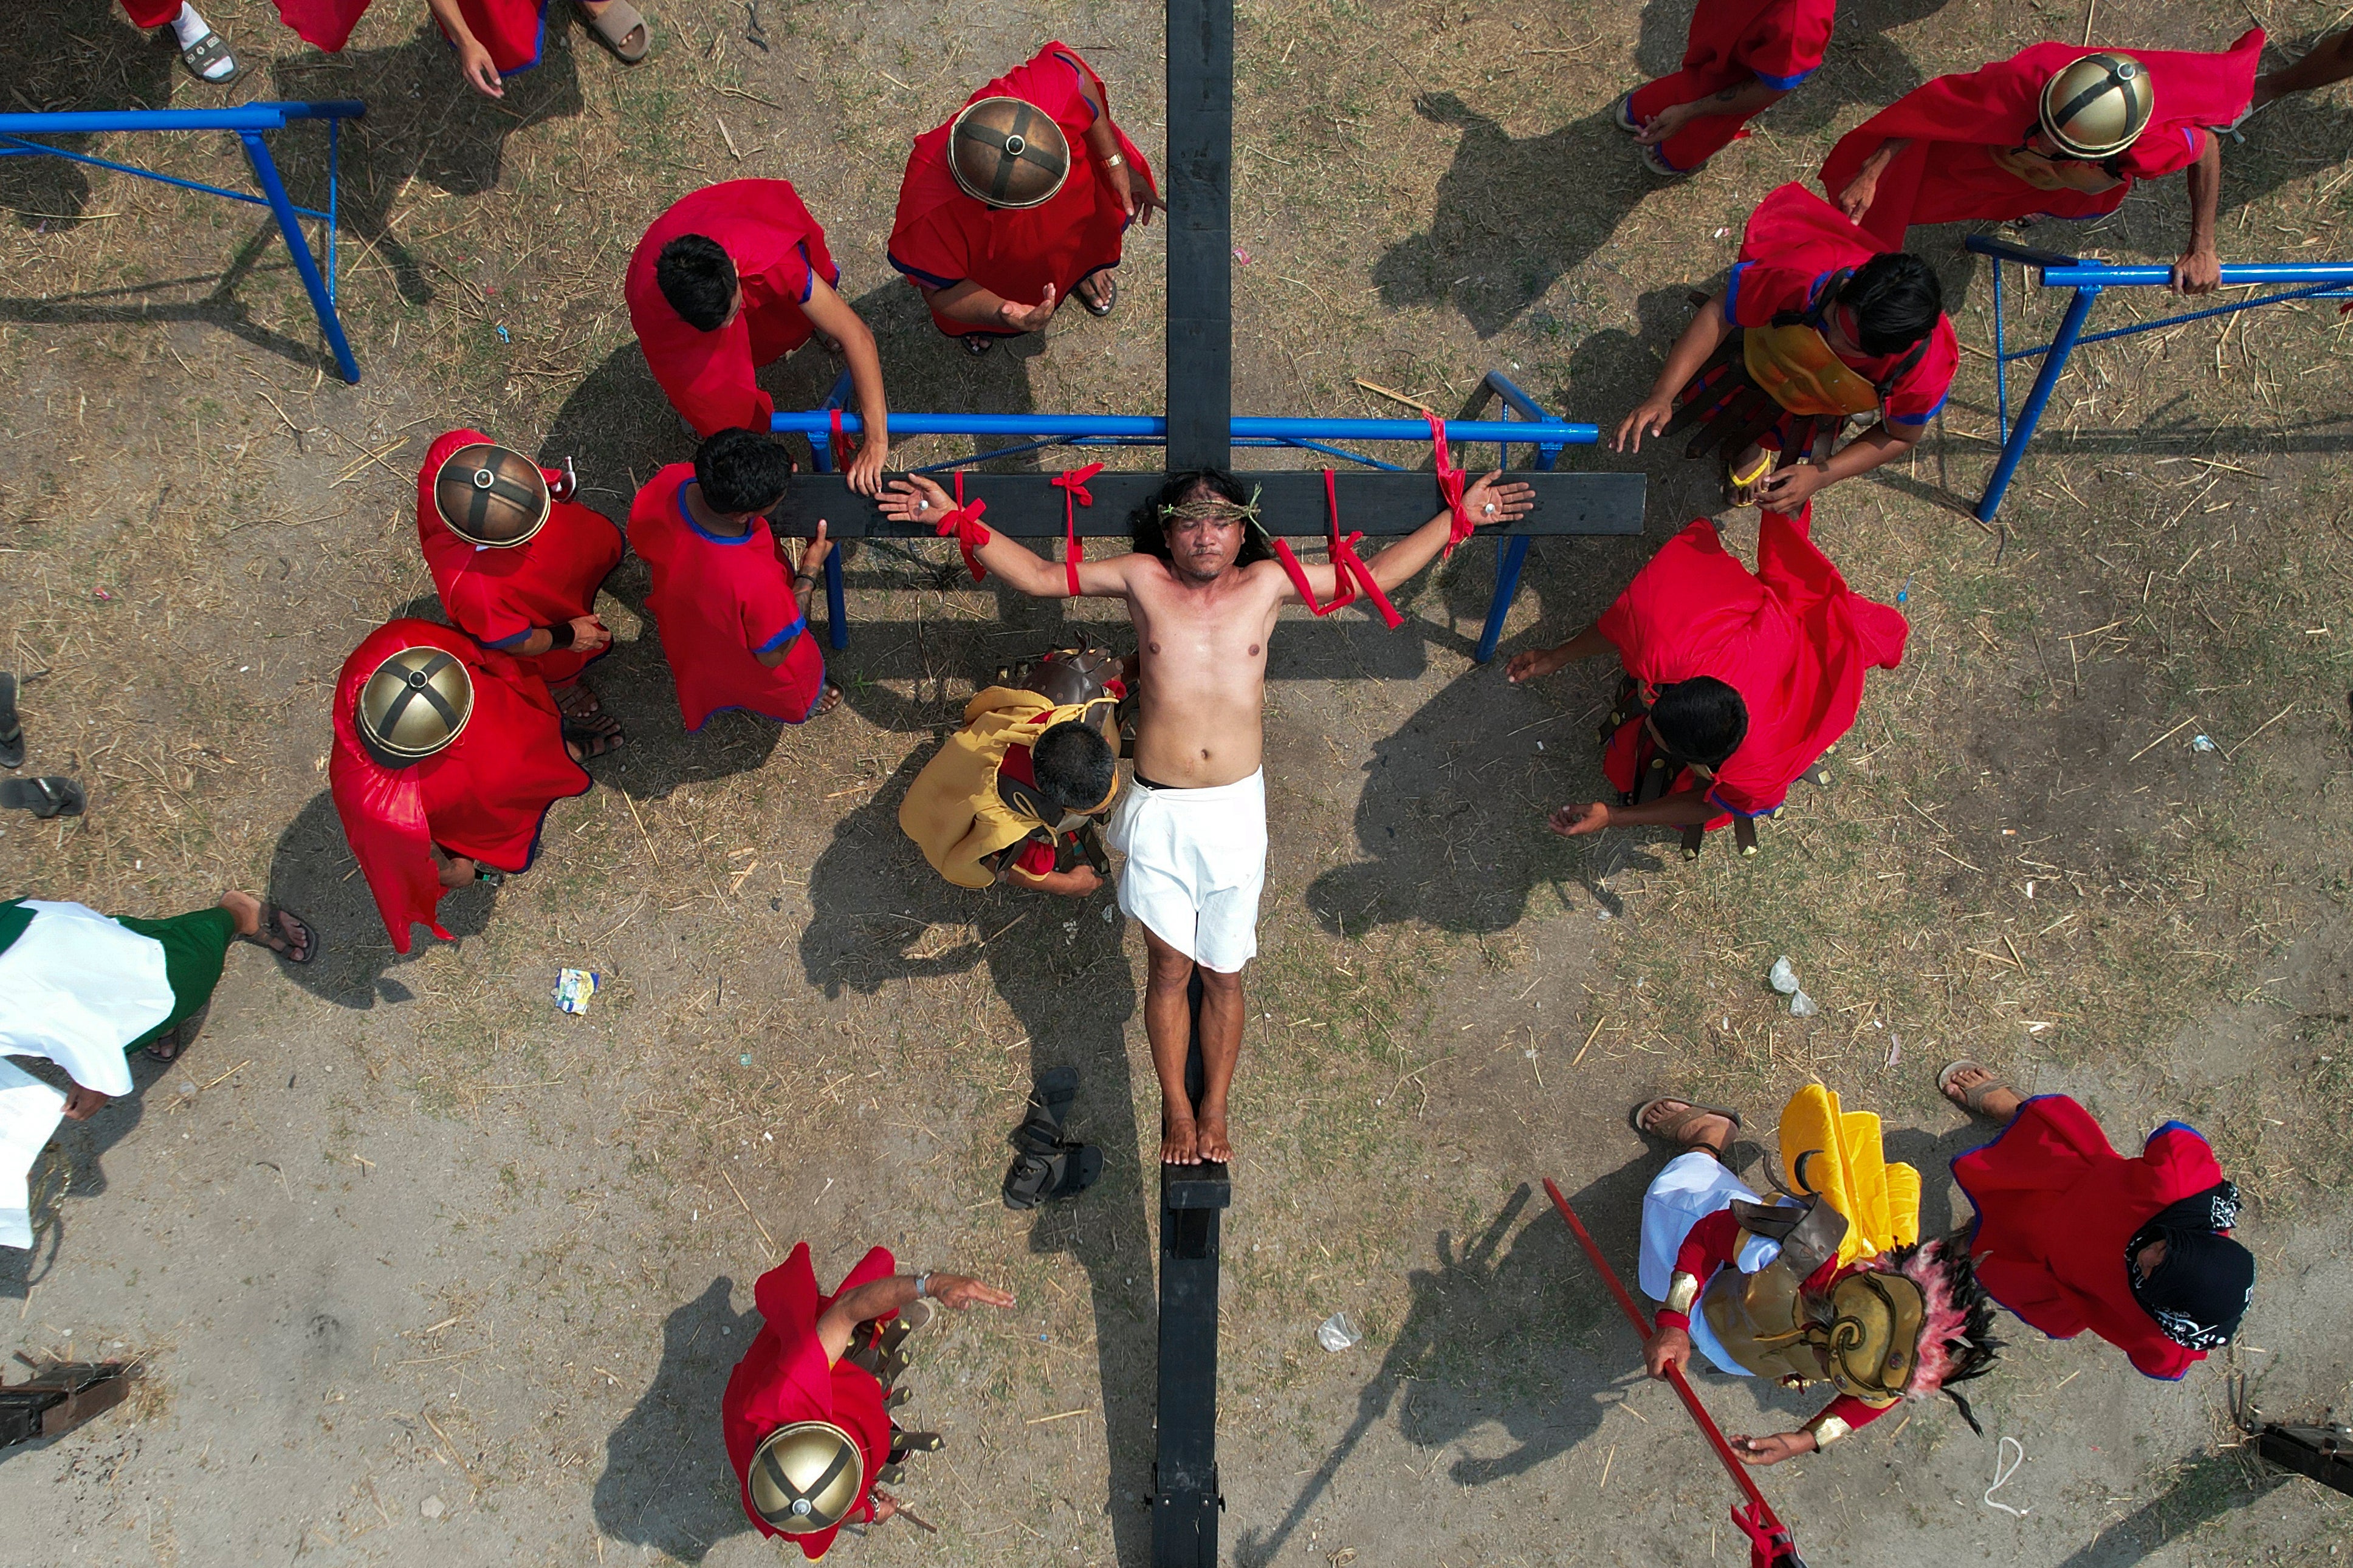 Ruben Enaje is nailed to the cross during a reenactment of Jesus Christ’s sufferings as part of Good Friday rituals